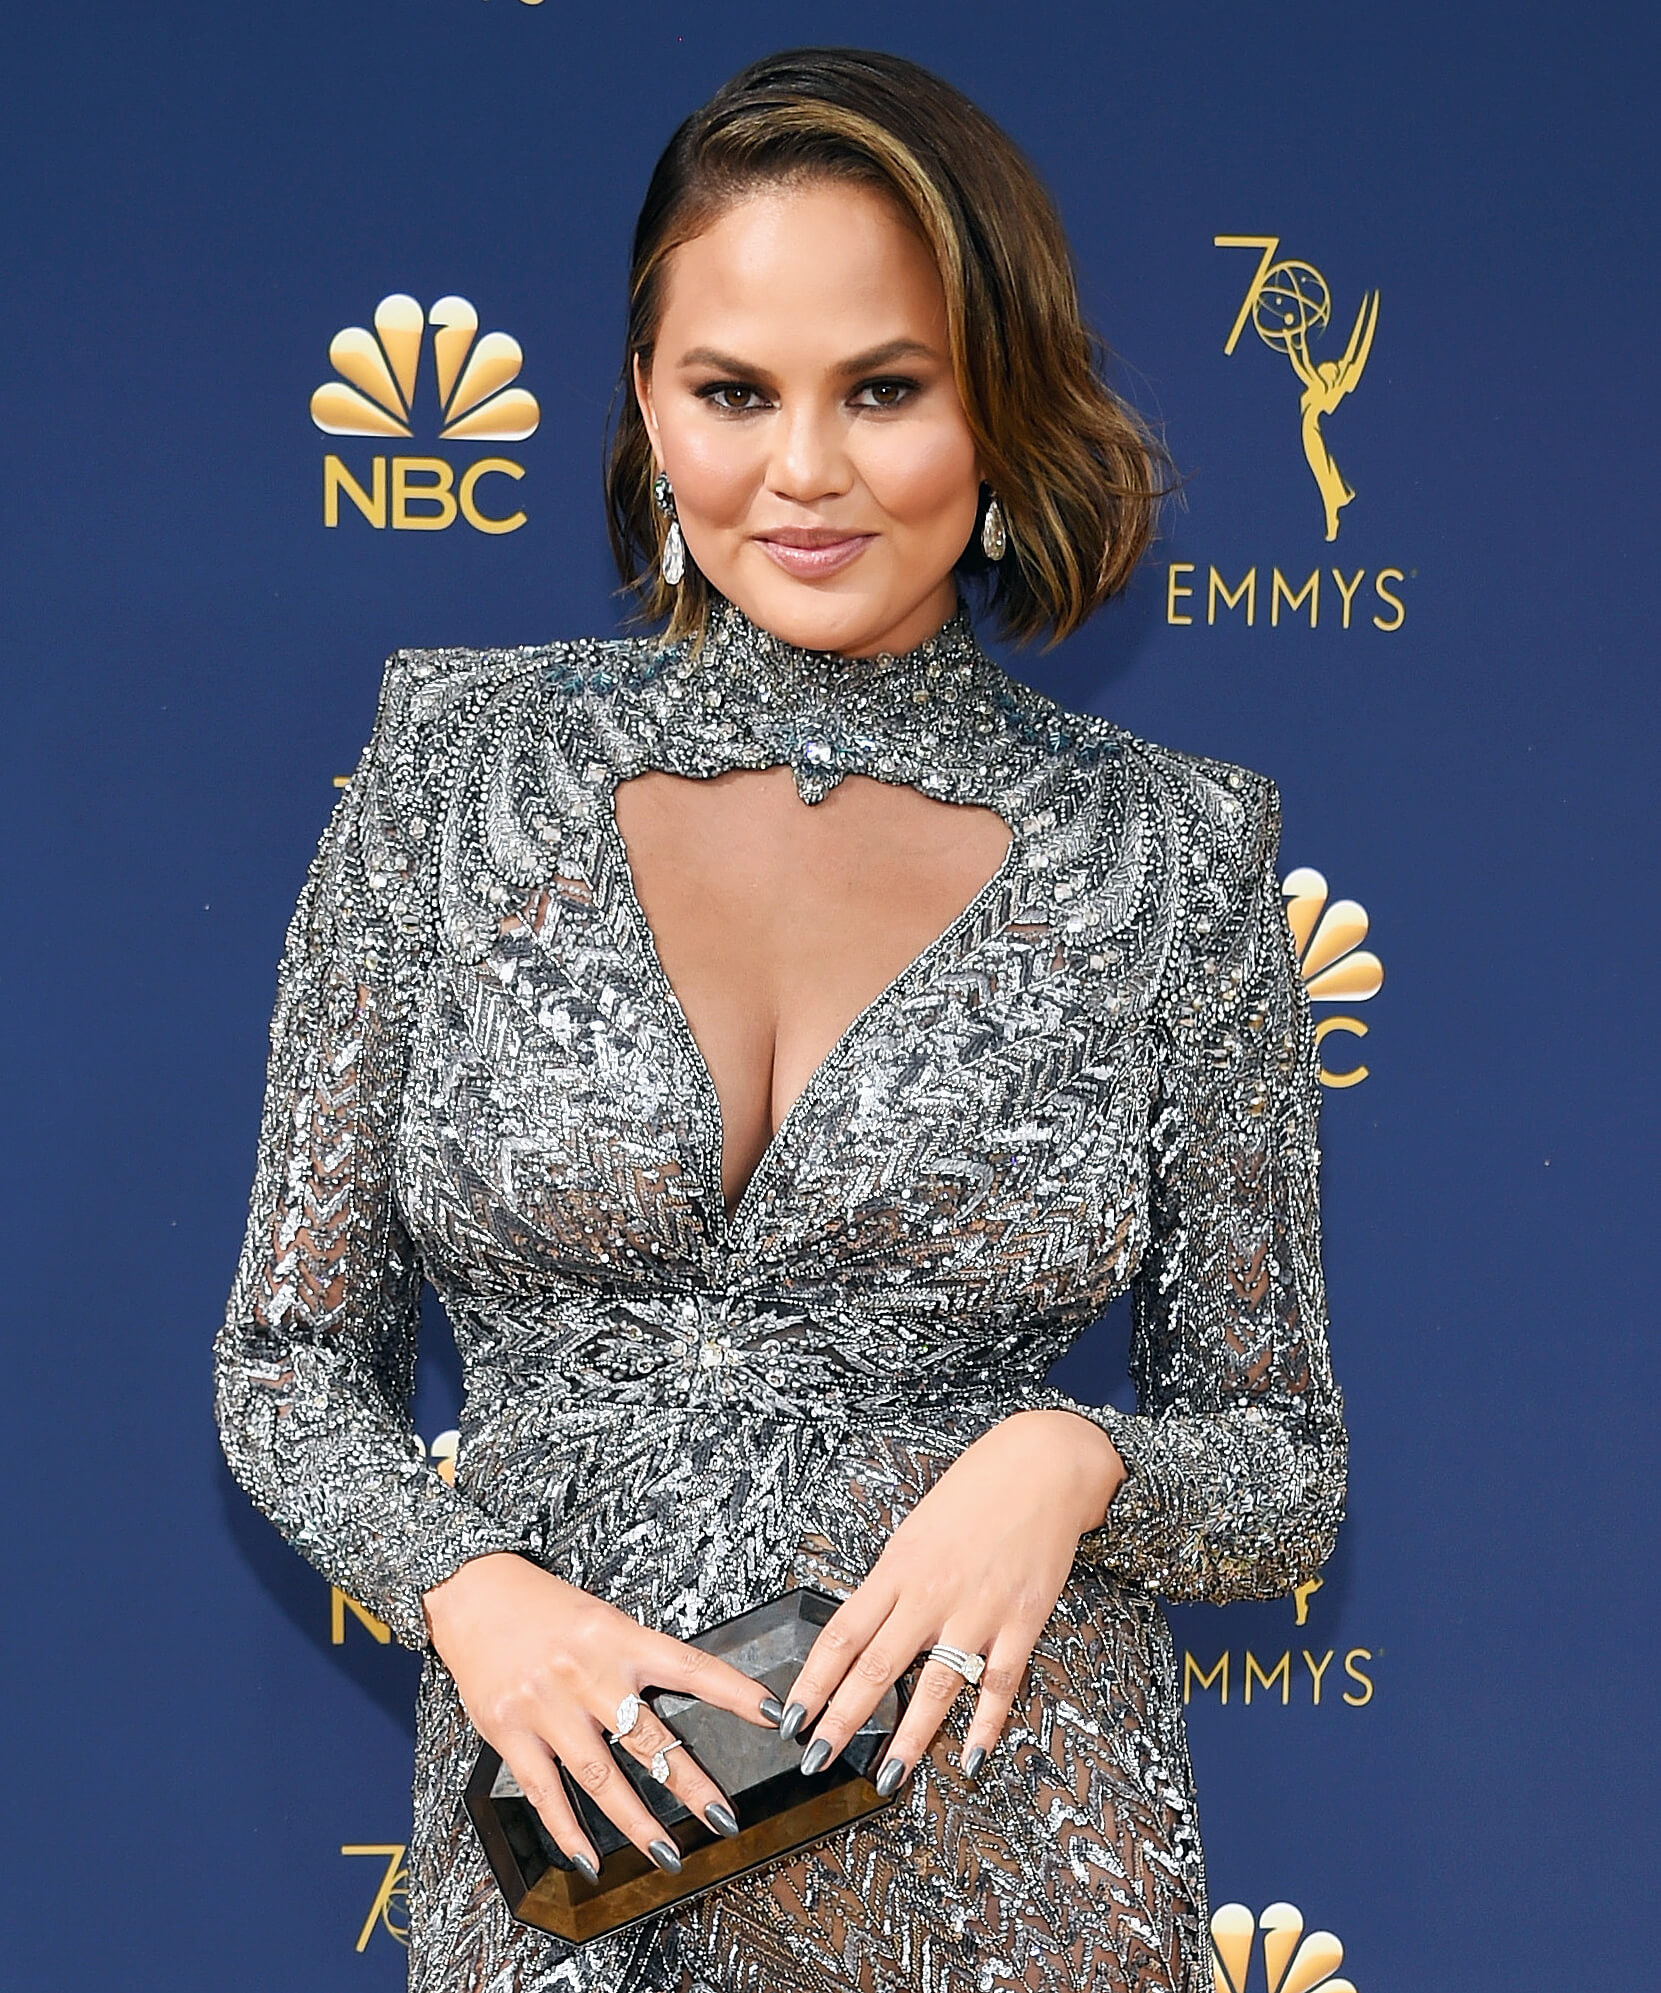 70+ Hottest Chrissy Teigen Pictures That Are Too Hot To Handle 523